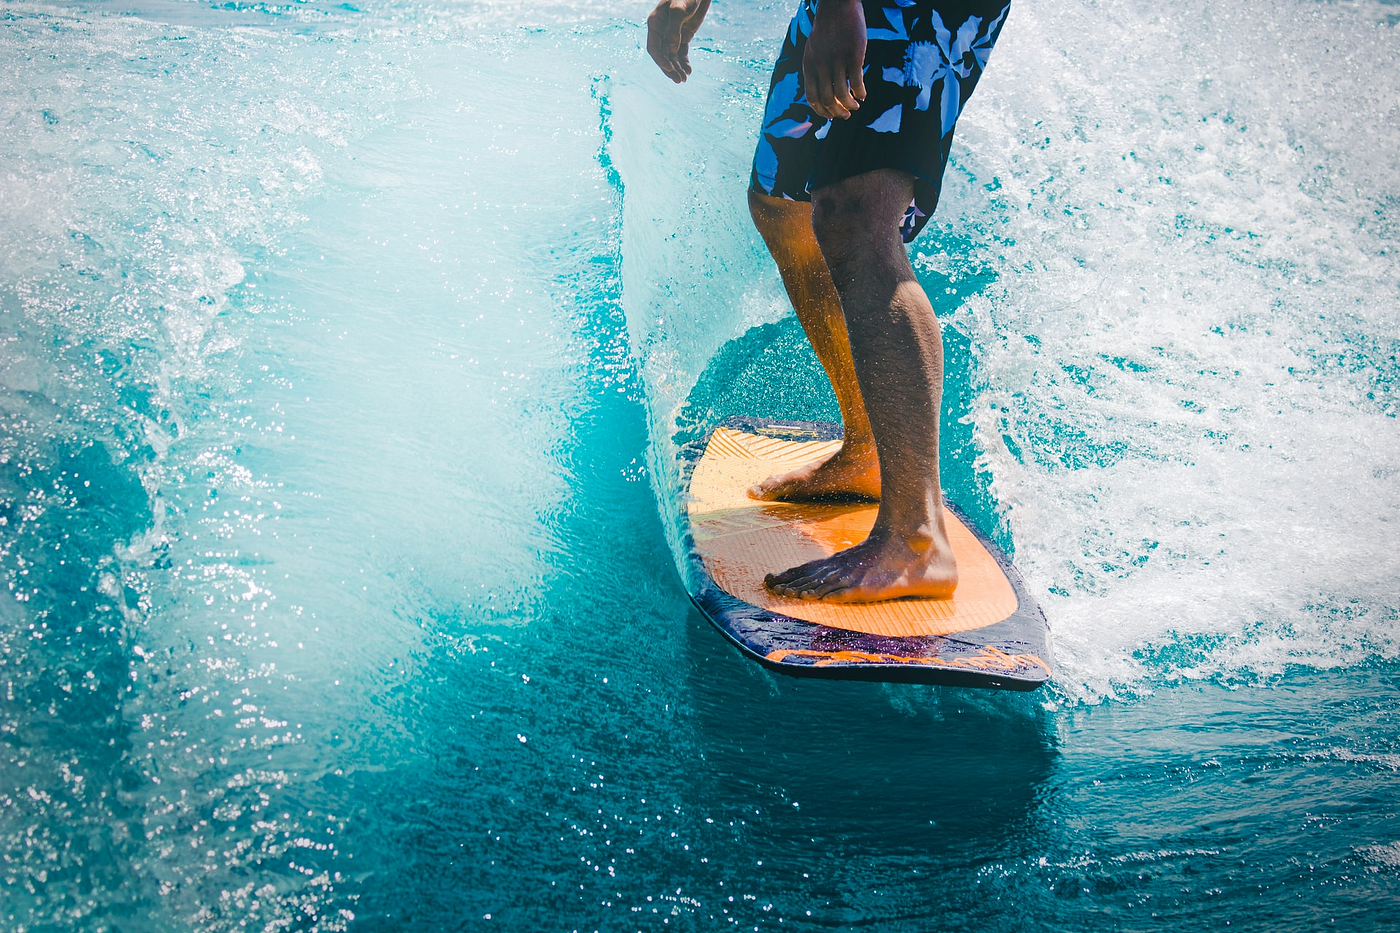 A close-up photo of a man surfing in shorts